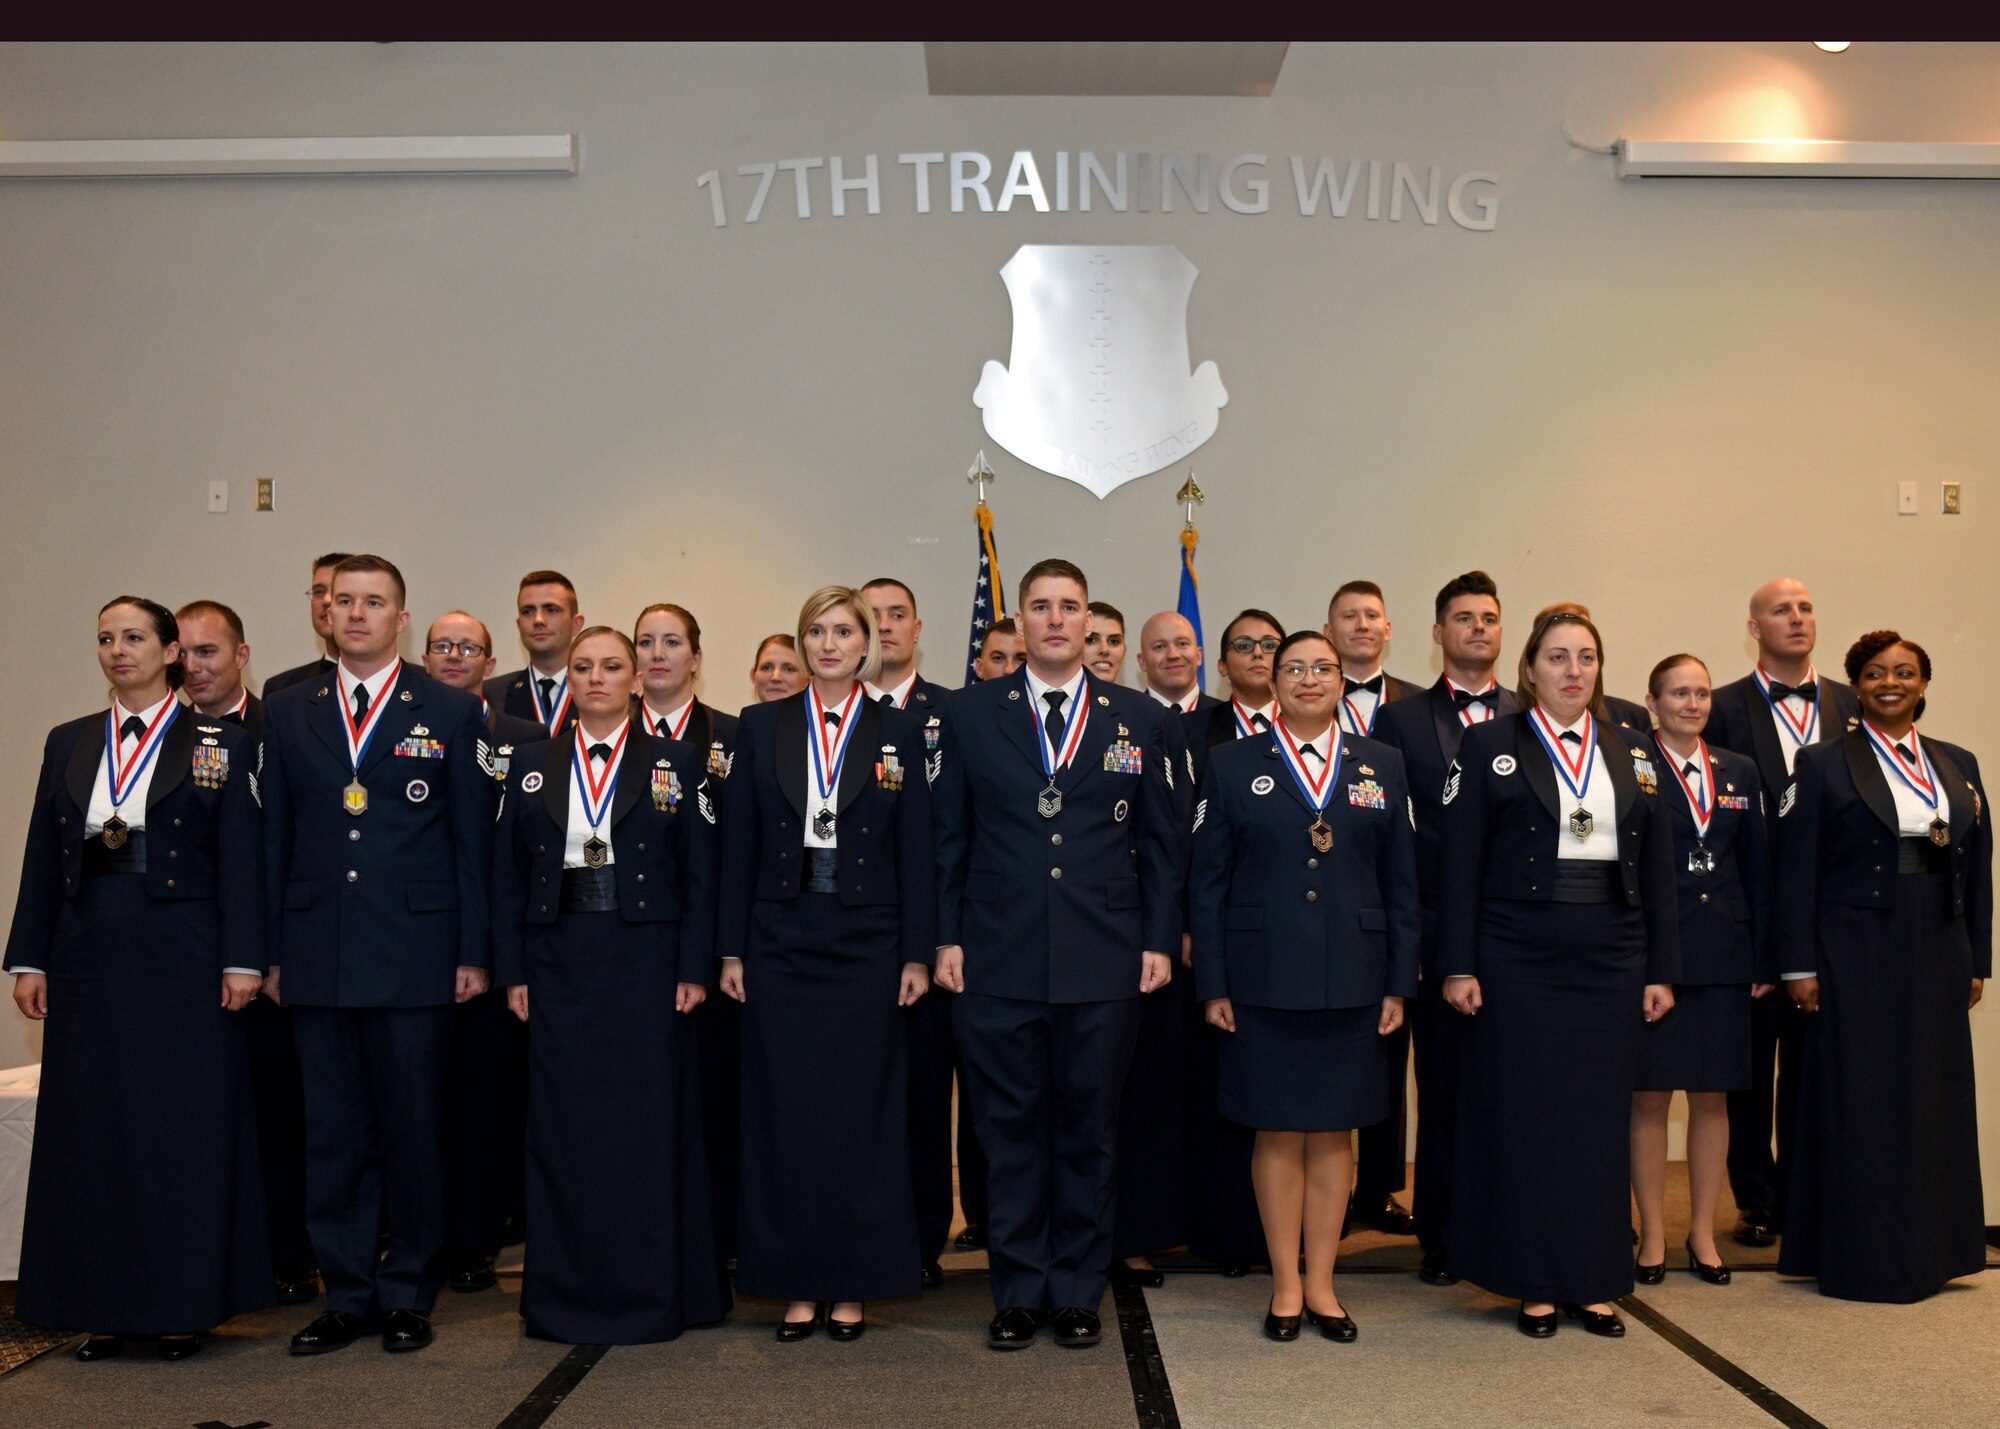 U.S. Air Force Senior noncommissioned officer inductees take on the Senior NCO charge during the Senior Noncommissioned Officer Induction Ceremony at the event center on Goodfellow Air Force Base, Texas, August 16, 2019. The inductees are transitioning from being technical experts and first line supervisors to operational leaders skilled in merging subordinates’ talents, skills, and resources with other teams’ functions to most effectively accomplish the mission. (U.S. Air Force photo by Airman 1st Class Robyn Hunsinger/Released)